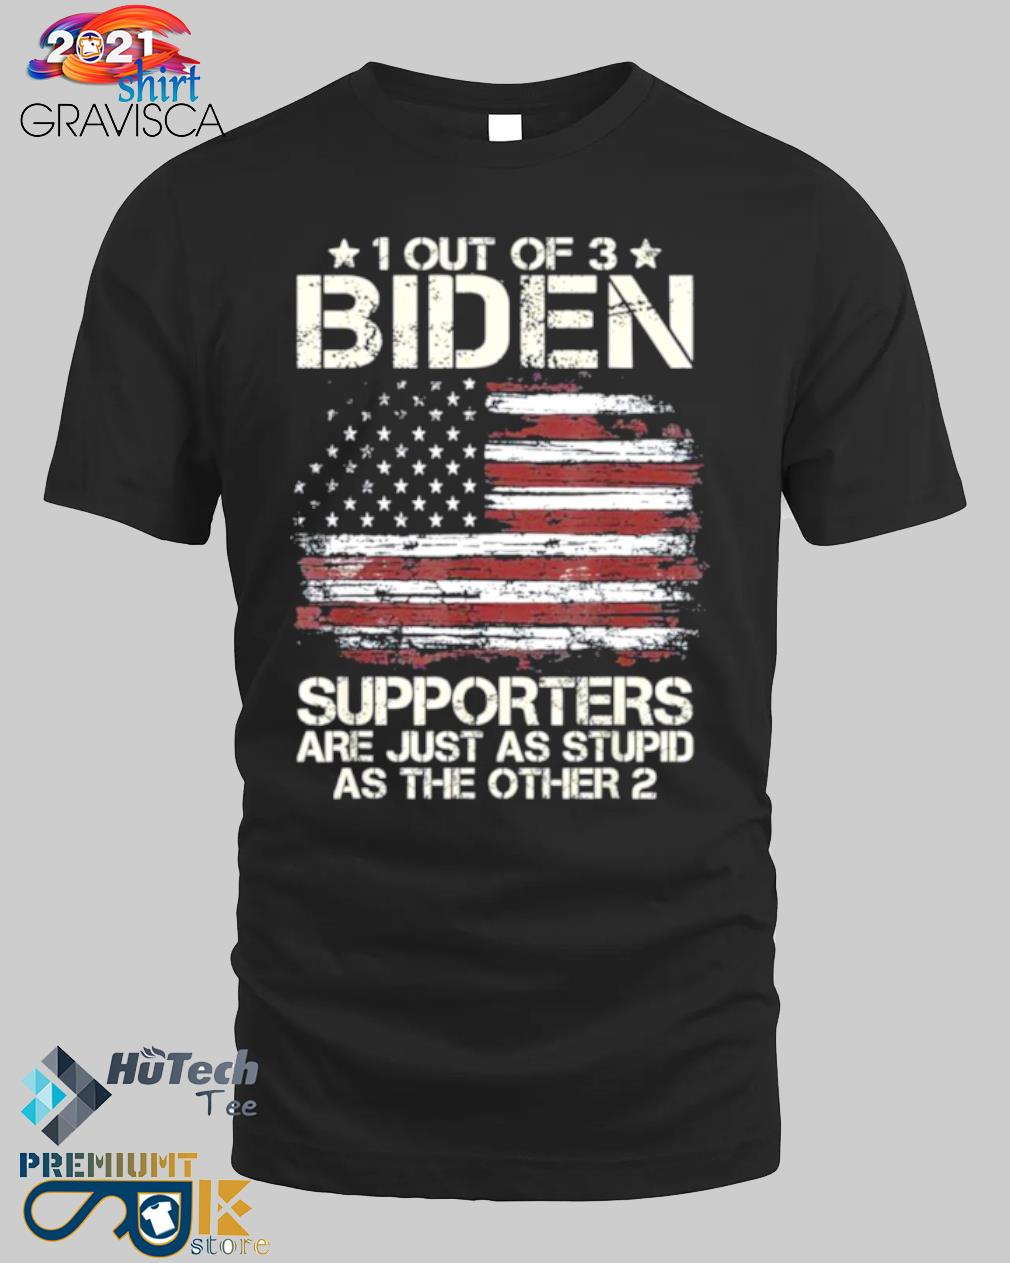 1 out of 3 Biden supporters are as stupid as the other 2 American flag shirt